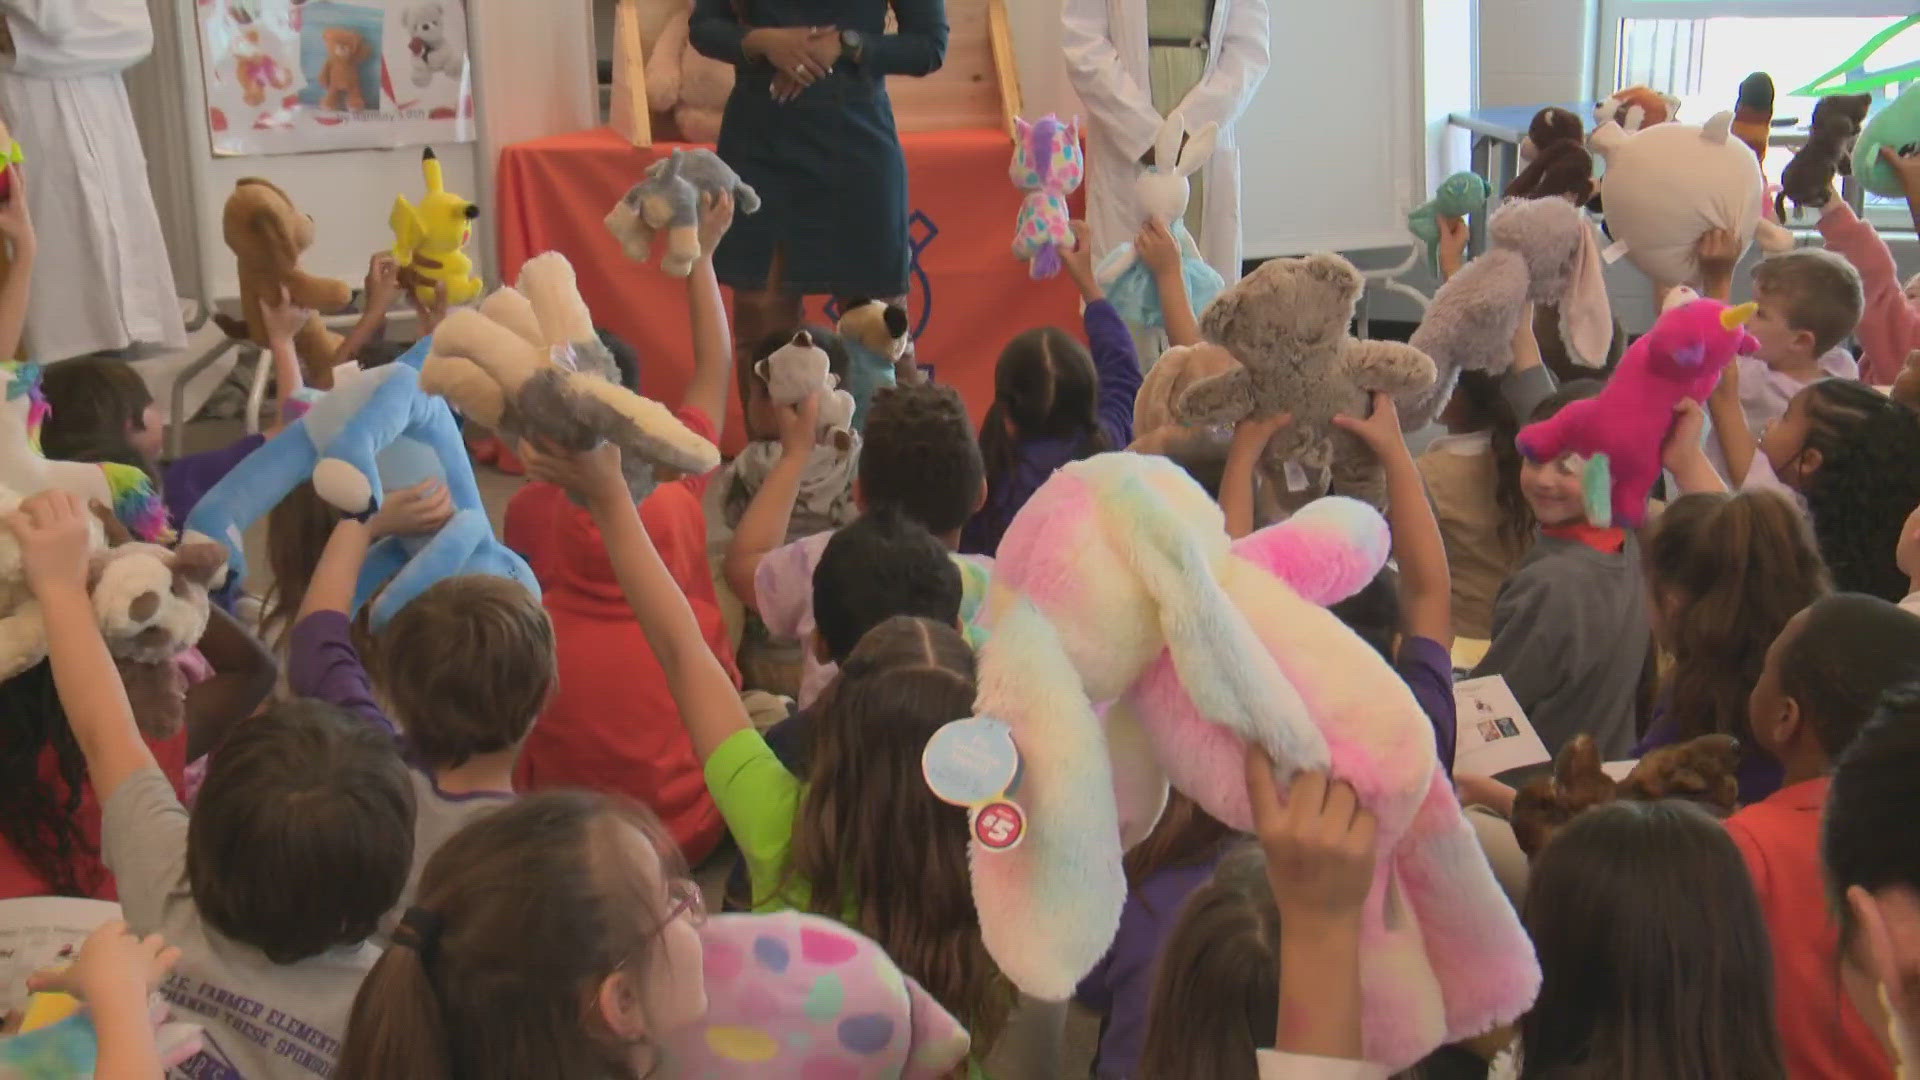 On Tuesday, eighth graders at Ramsey Middle School put on a "teddy bear" clinic for elementary school students.